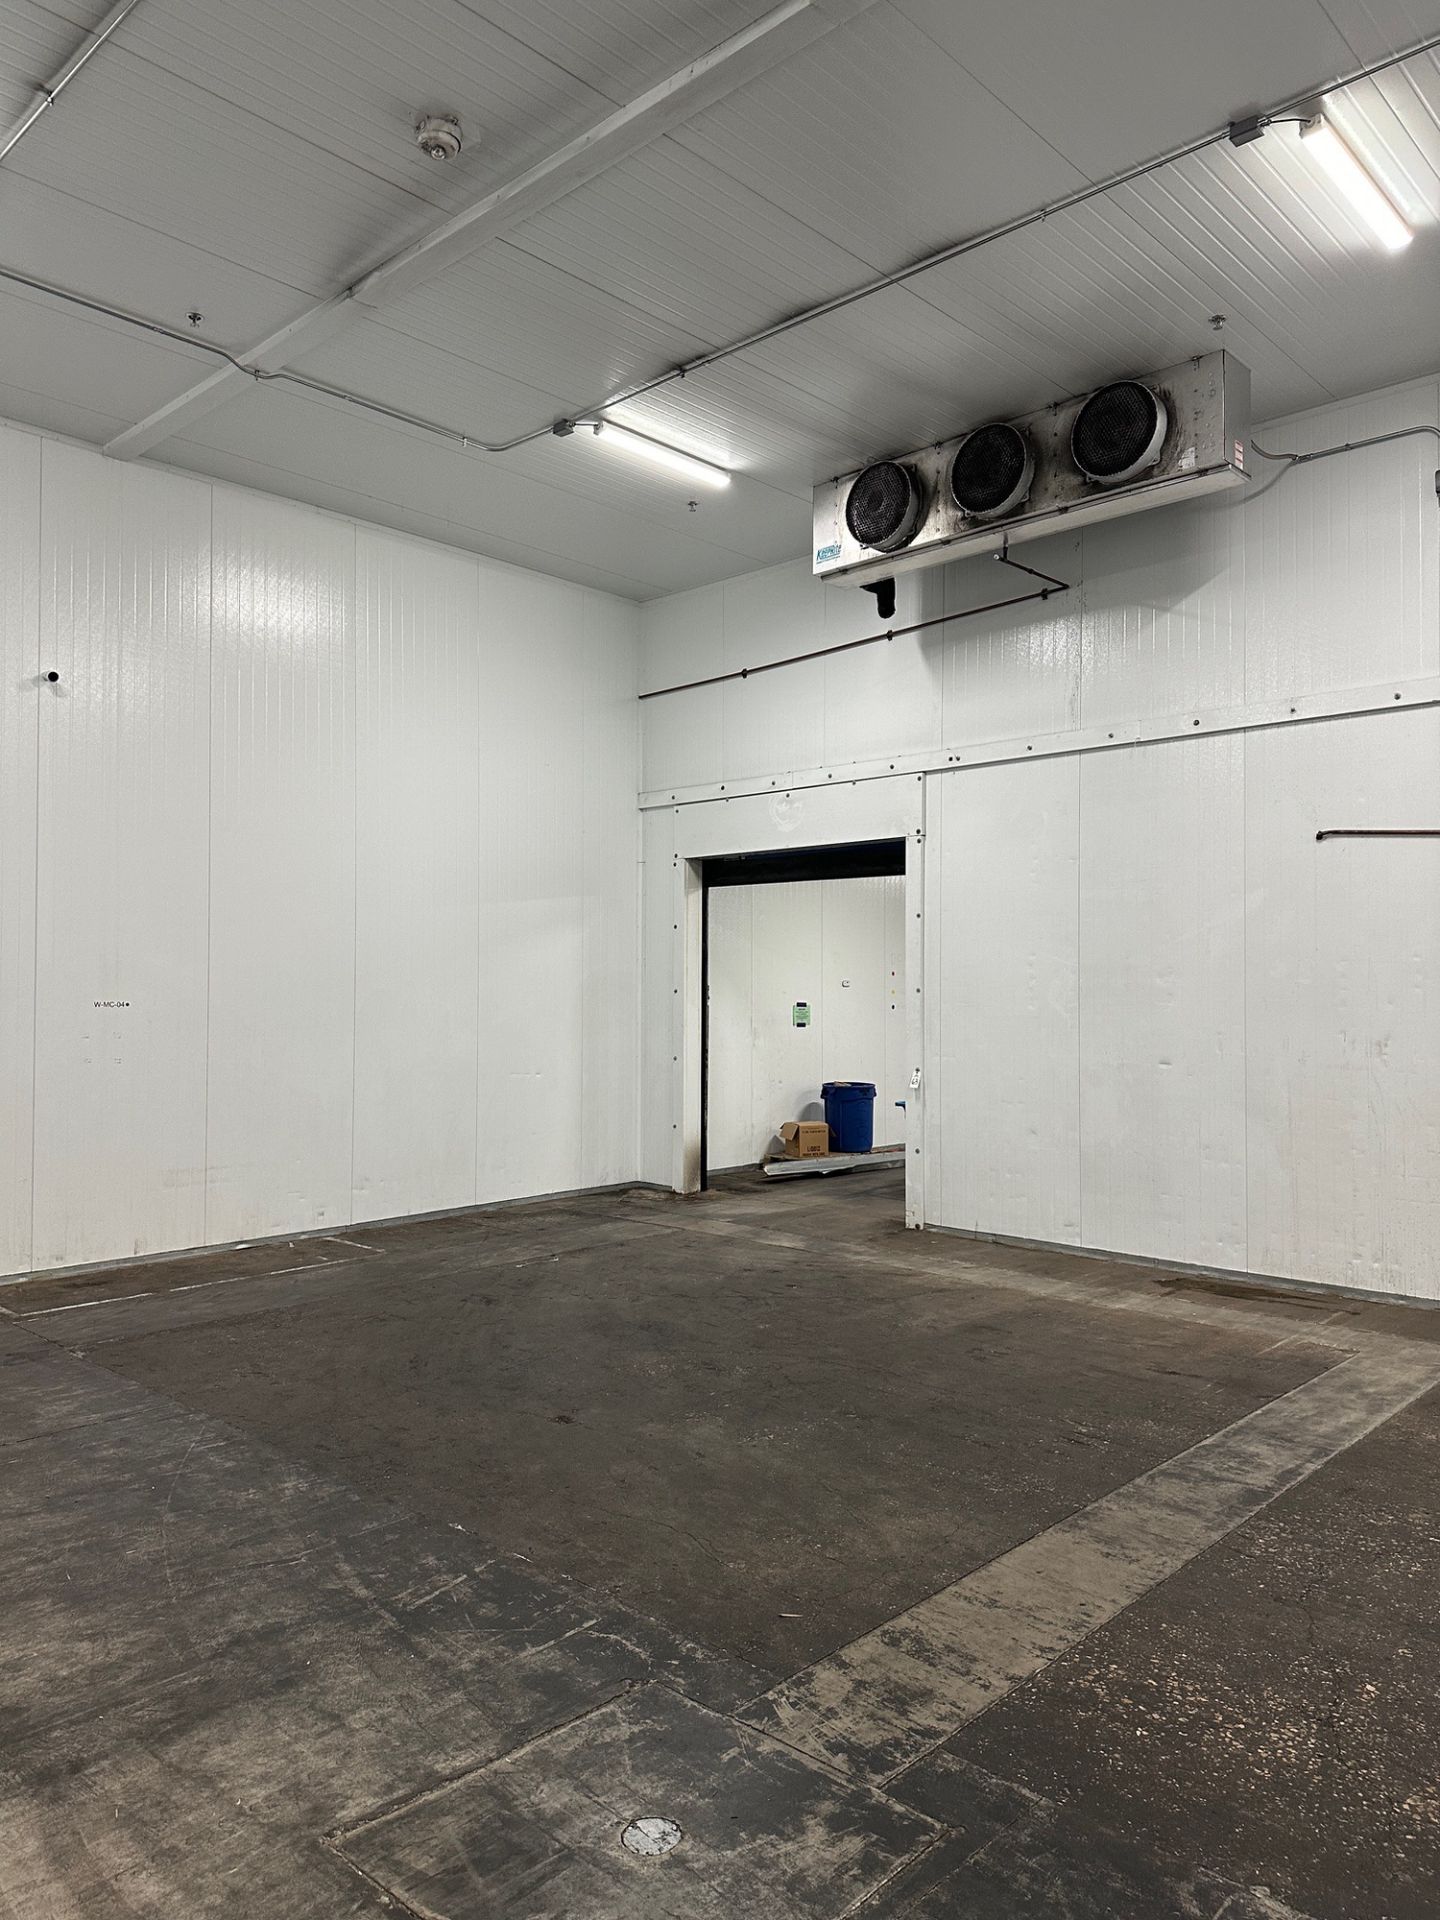 Cold Box - (3) Cooling Units - Shared Wall - (Approx. 32' x 77' x 18' - 8' x 10' Drive In Door - Man - Image 6 of 14